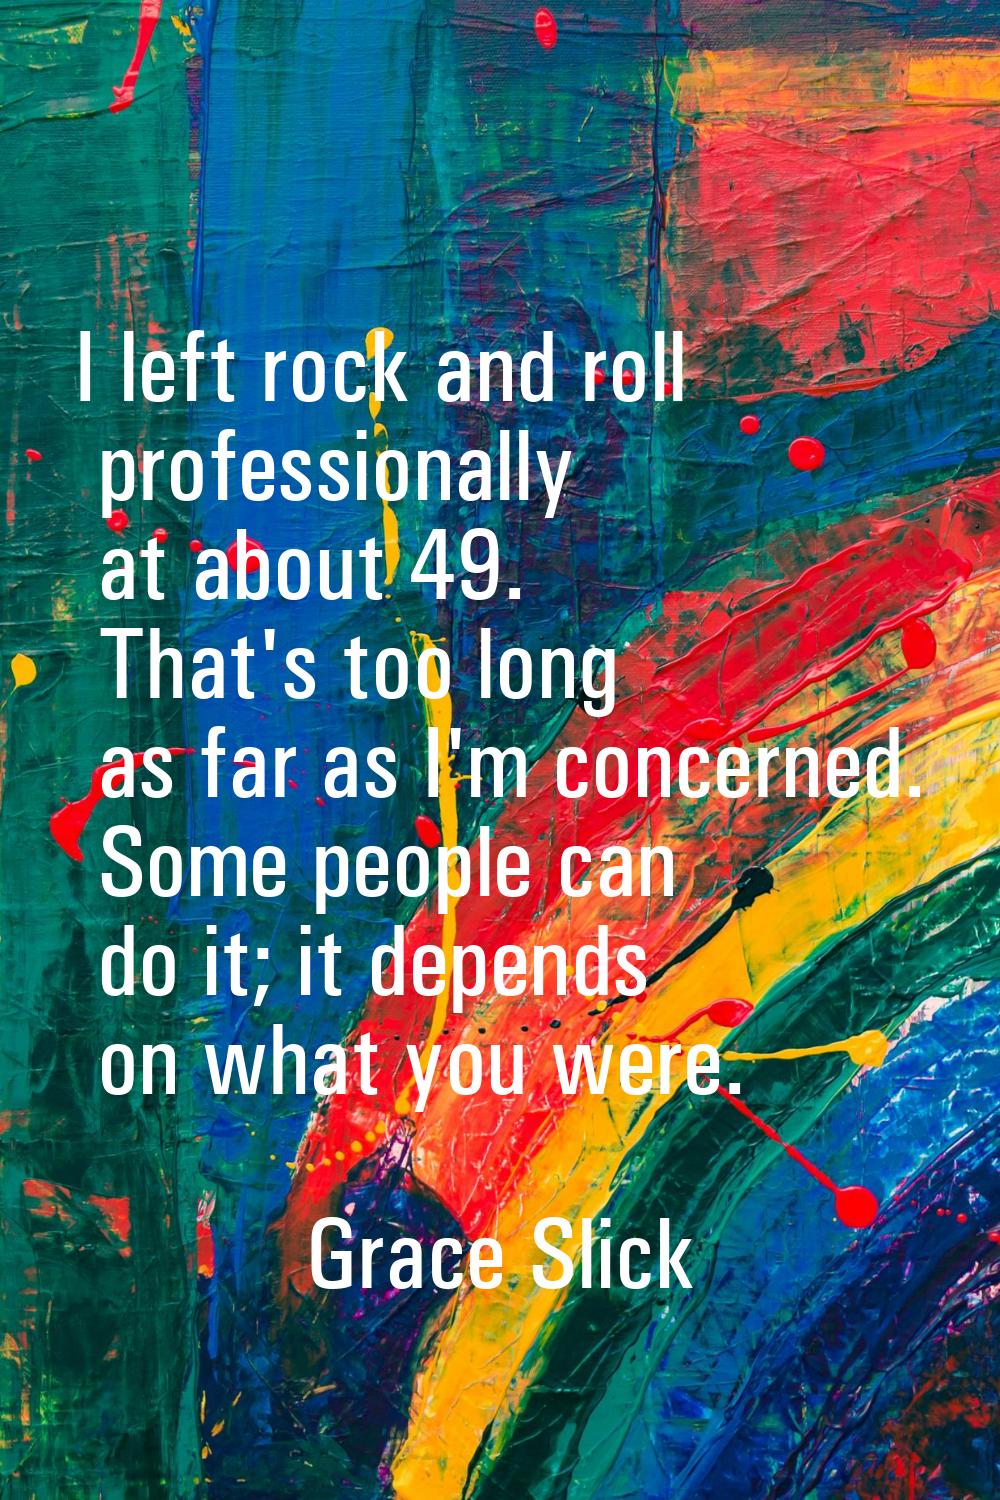 I left rock and roll professionally at about 49. That's too long as far as I'm concerned. Some peop